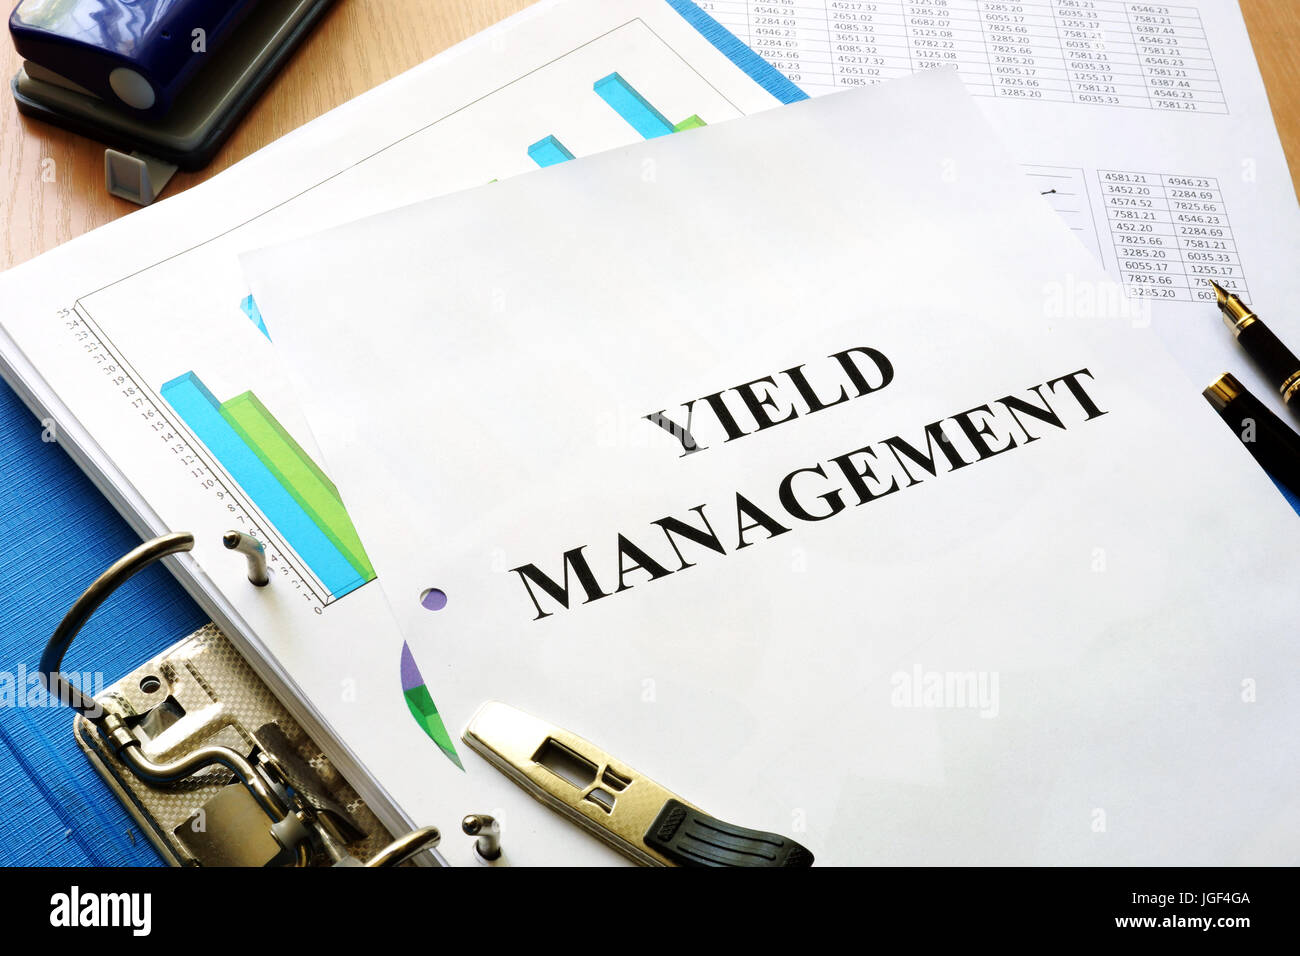 Folder and documents with title Yield management. Stock Photo